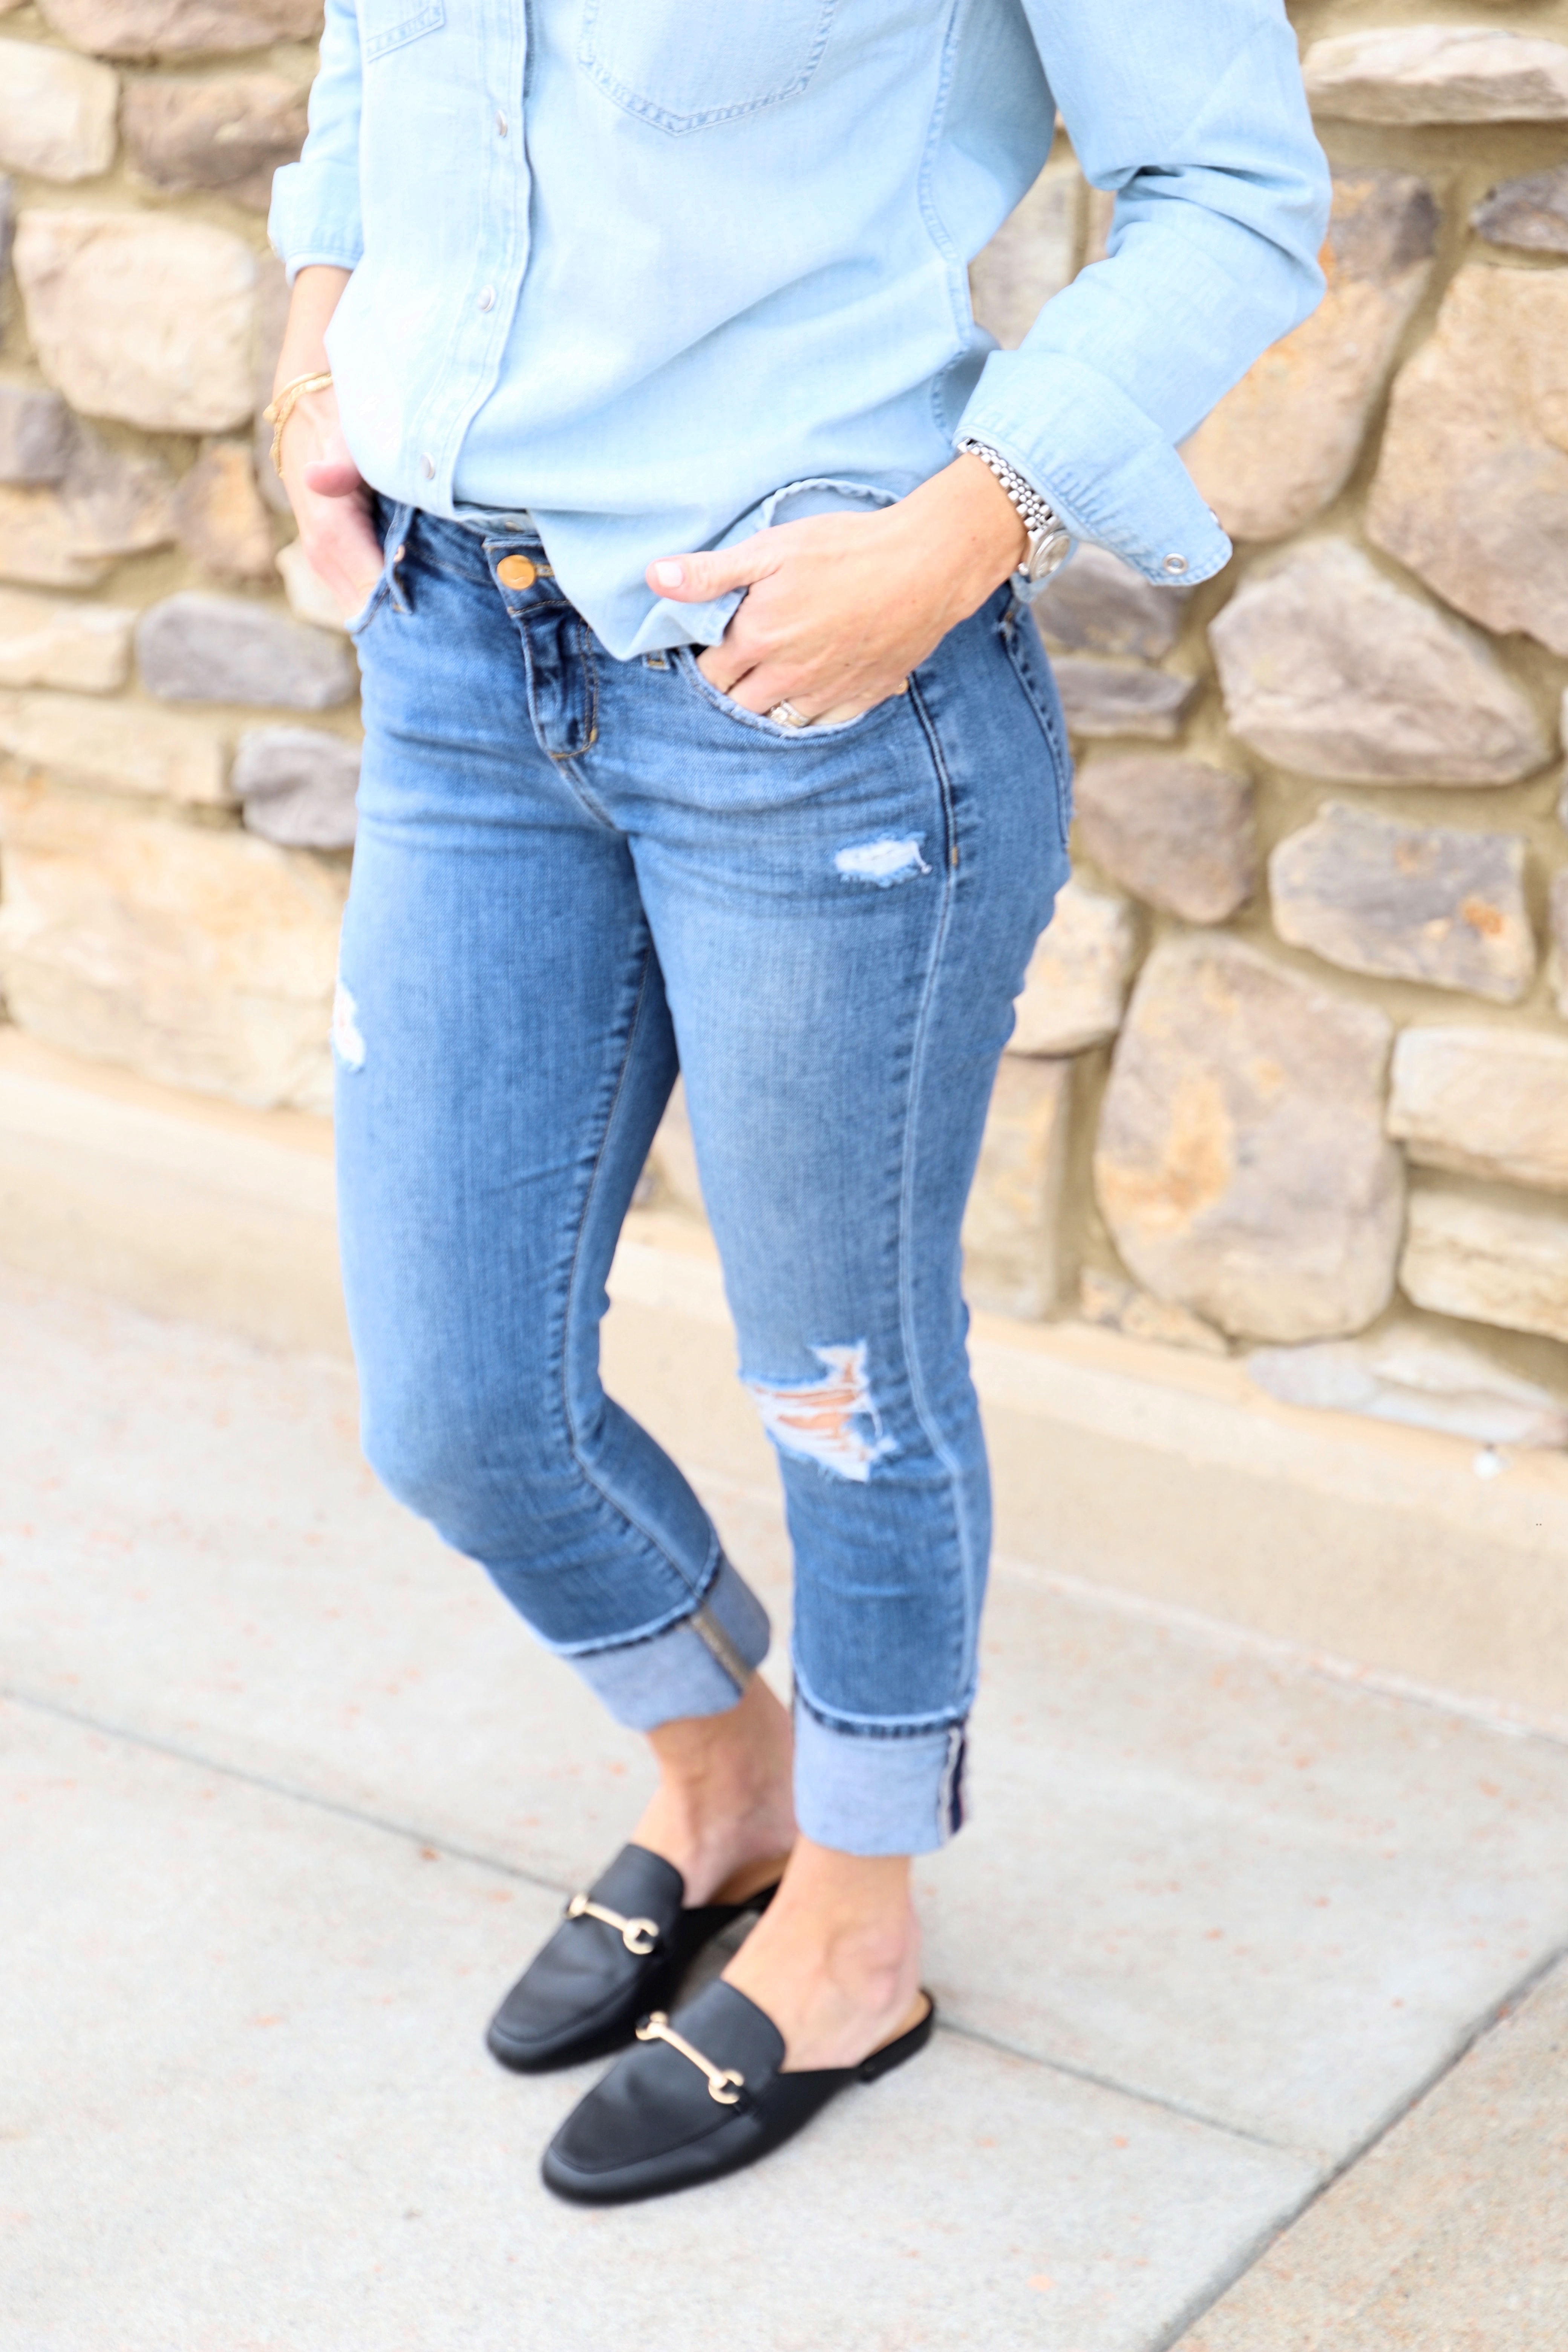 spring chambary shirt jcrew joes jeans black mules target spring outfits